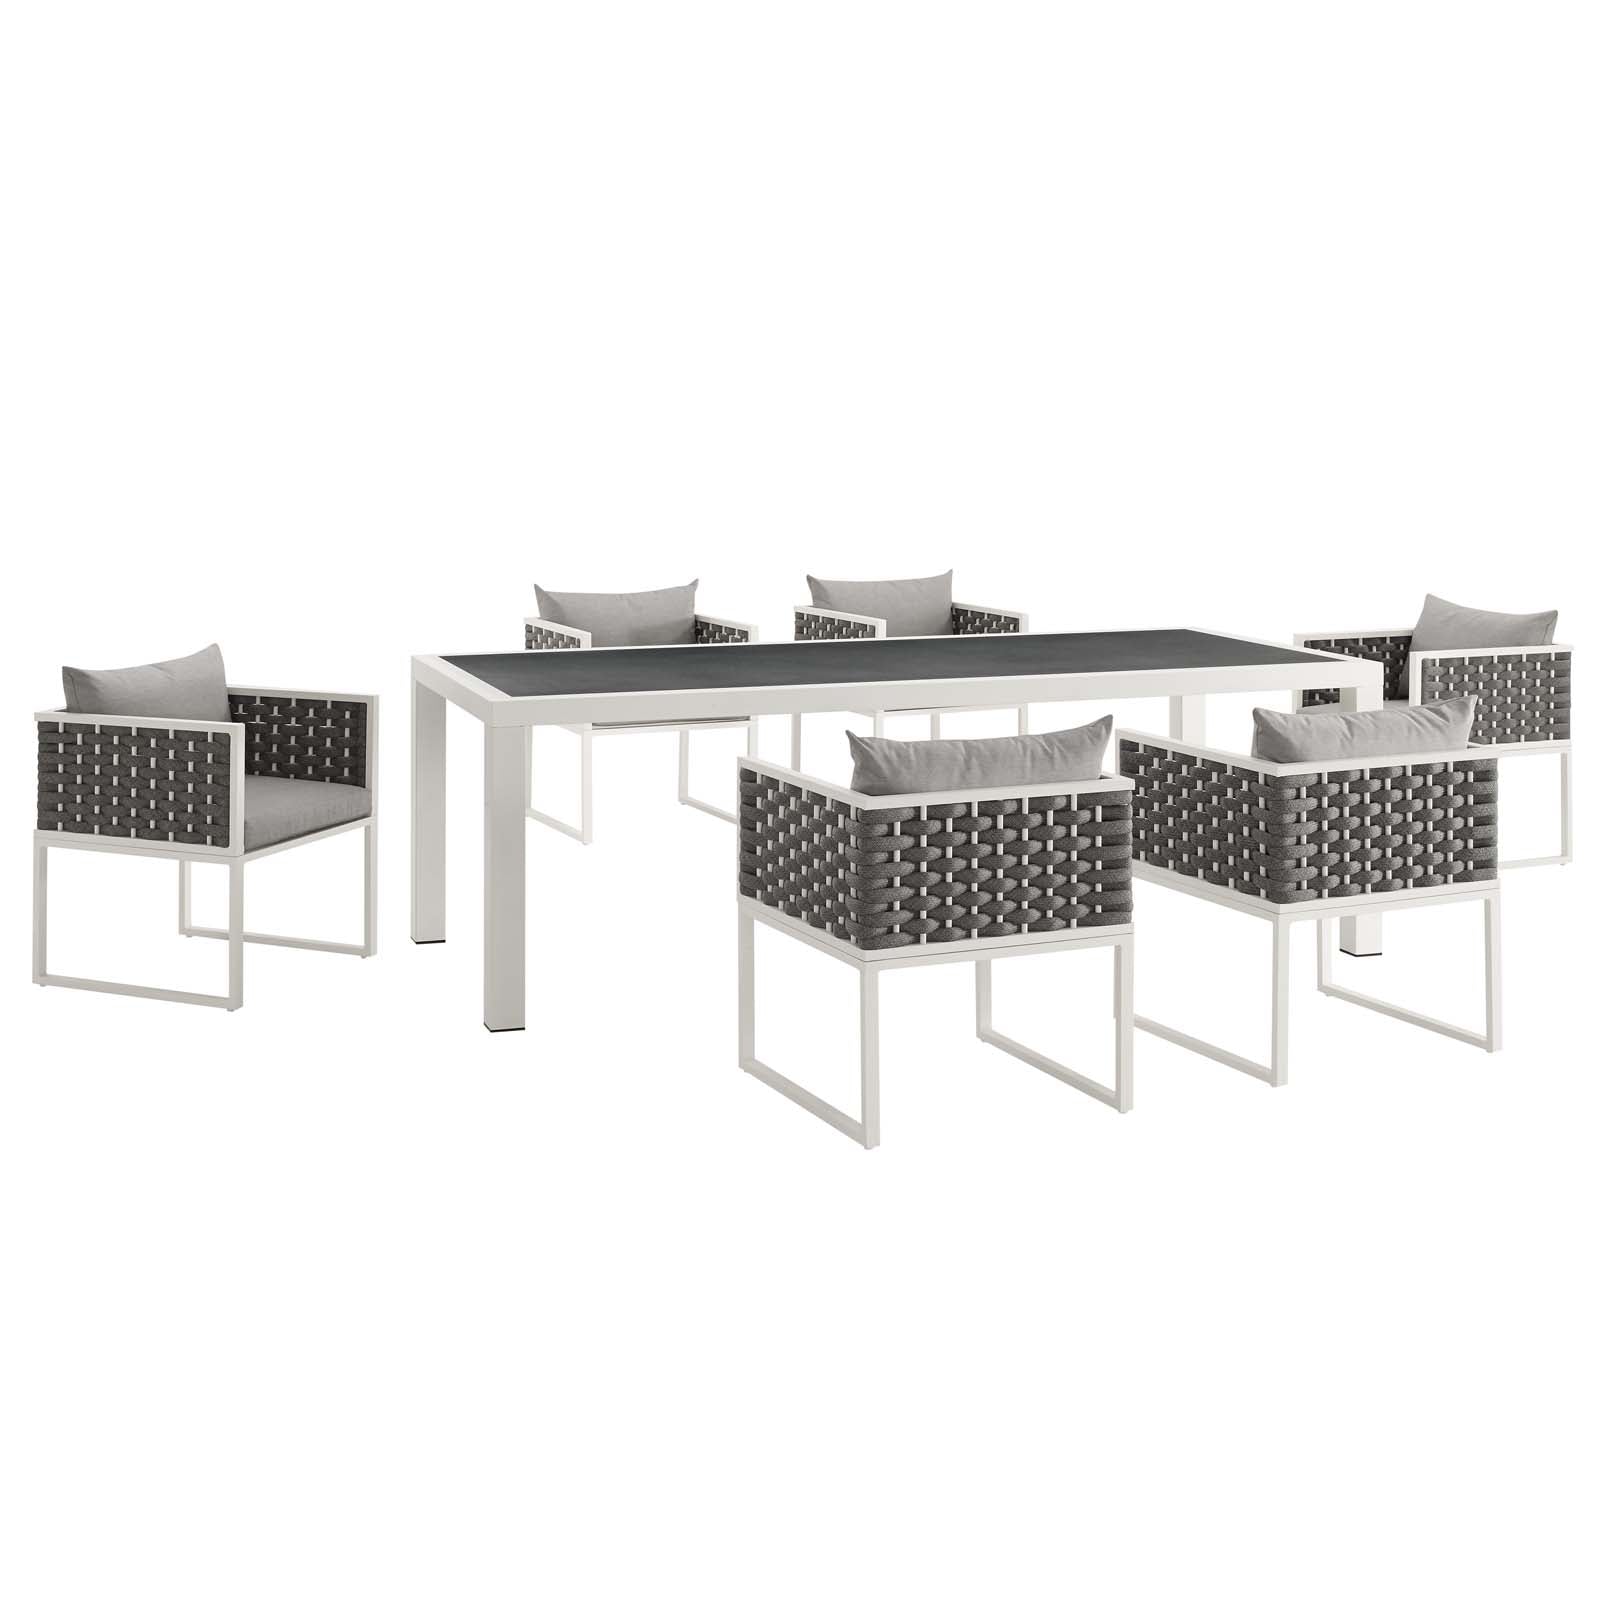 Stance 7 Piece Outdoor Patio Aluminum Dining Set - Polyserter Fabric Dining Room Table Sets